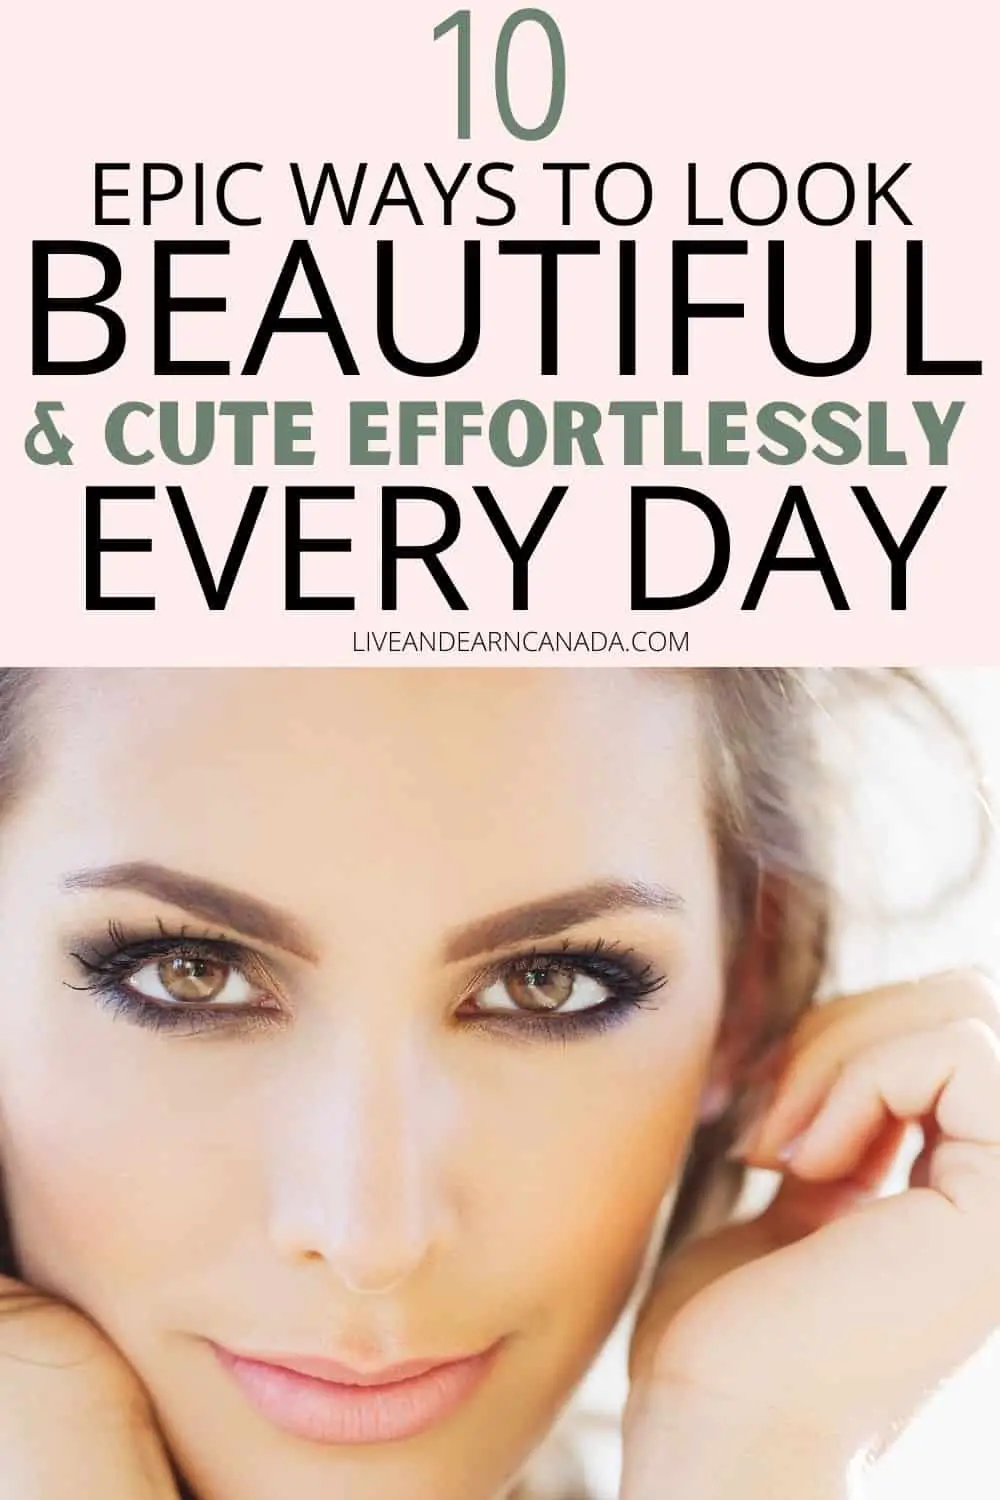 How to be beautiful all the time! How to be beautiful all the time. Beauty hacks and tips on how to be prettier, Beauty hacks and tips on how to be prettier without makeup naturally. Non superficial checklist that will make your skin and appearance glow.!